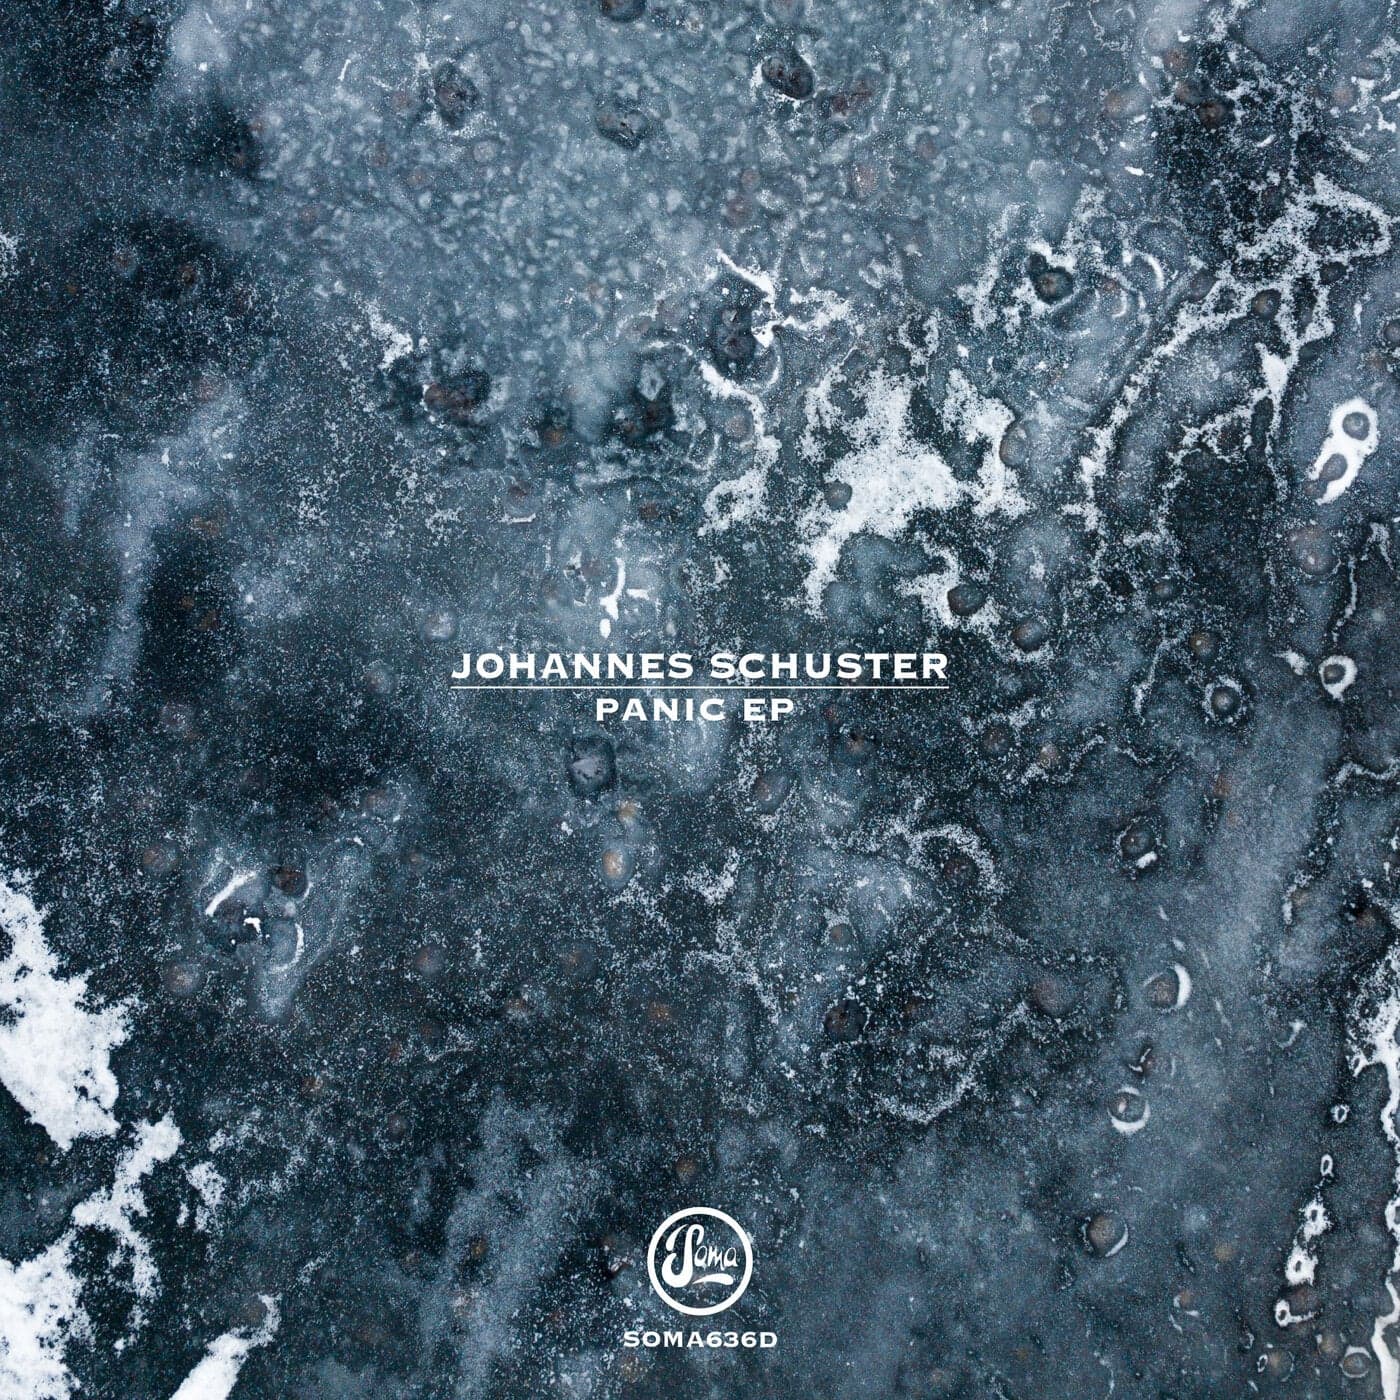 image cover: Johannes Schuster - Panic EP / SOMA636D